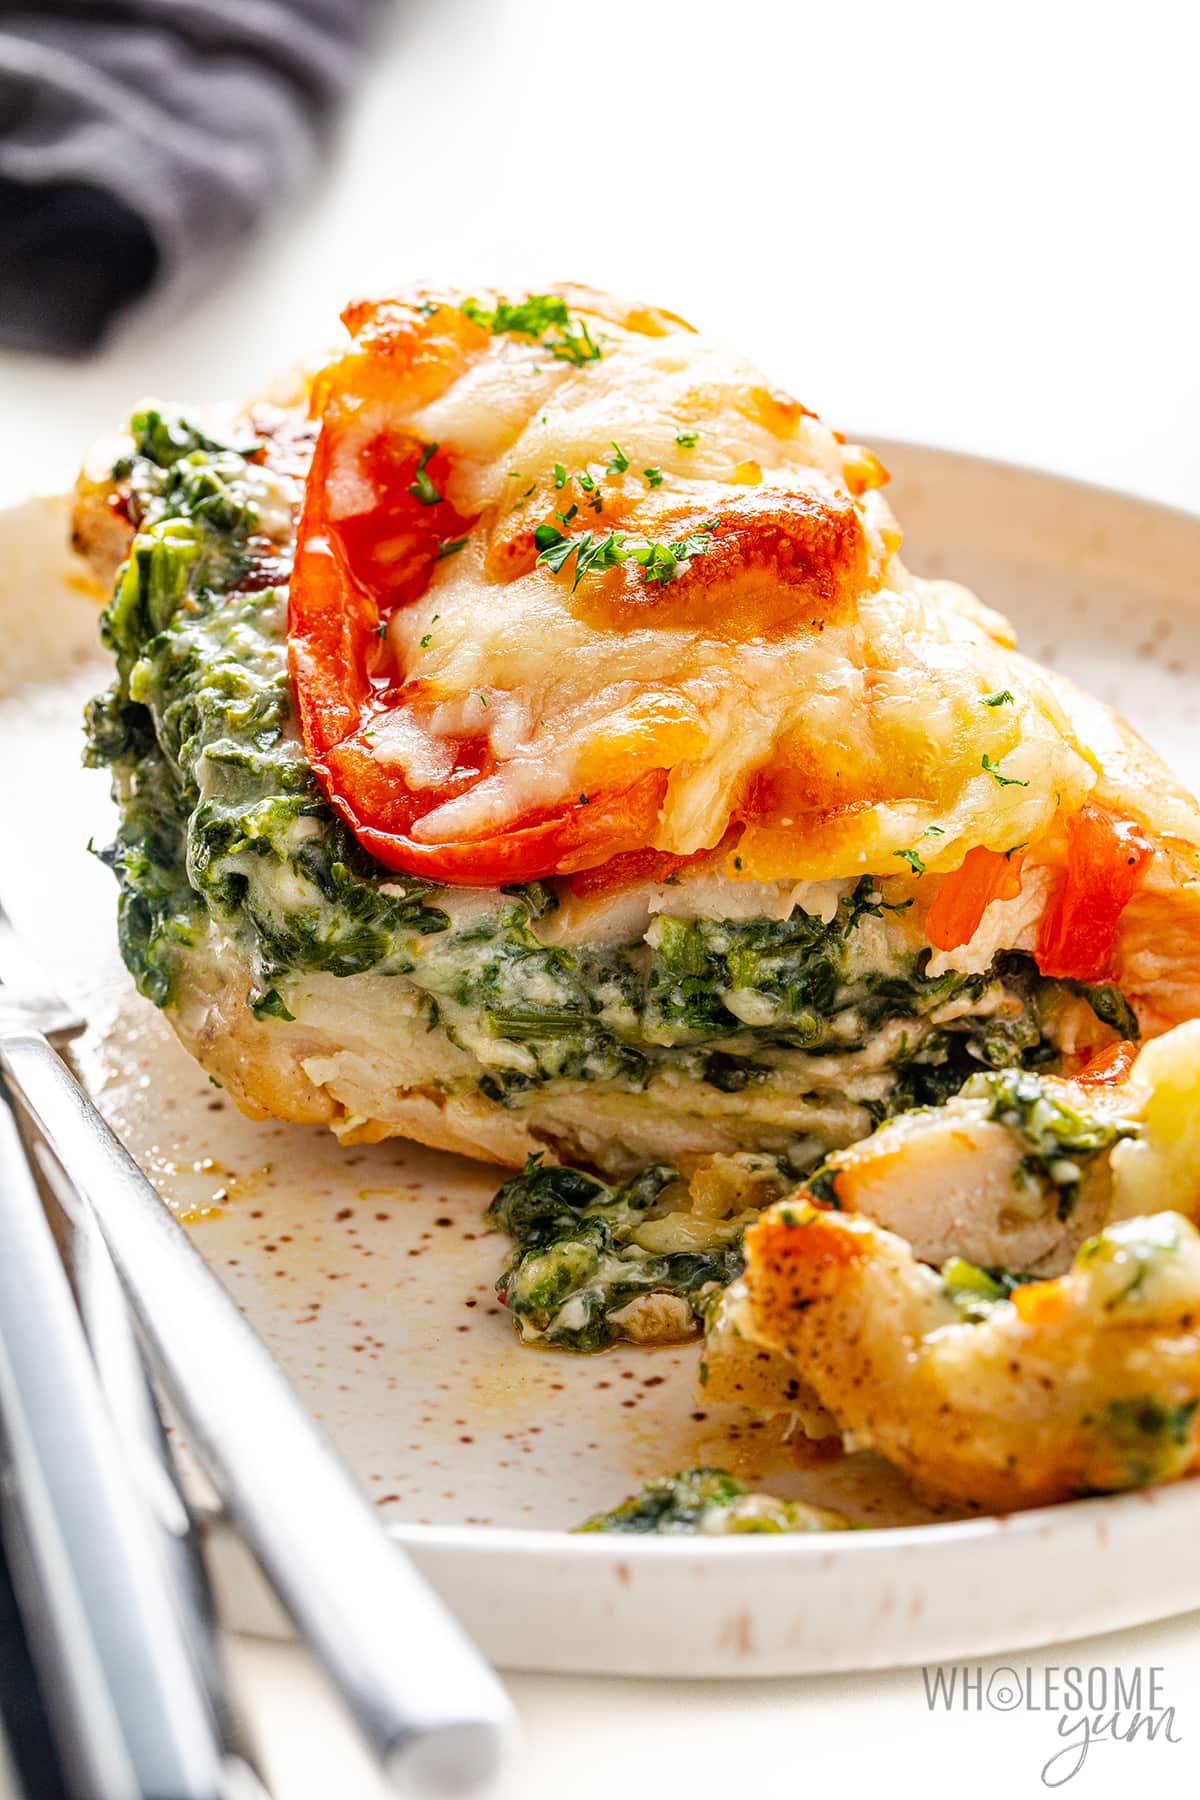 Slice the spinach stuffed chicken and place on a plate.